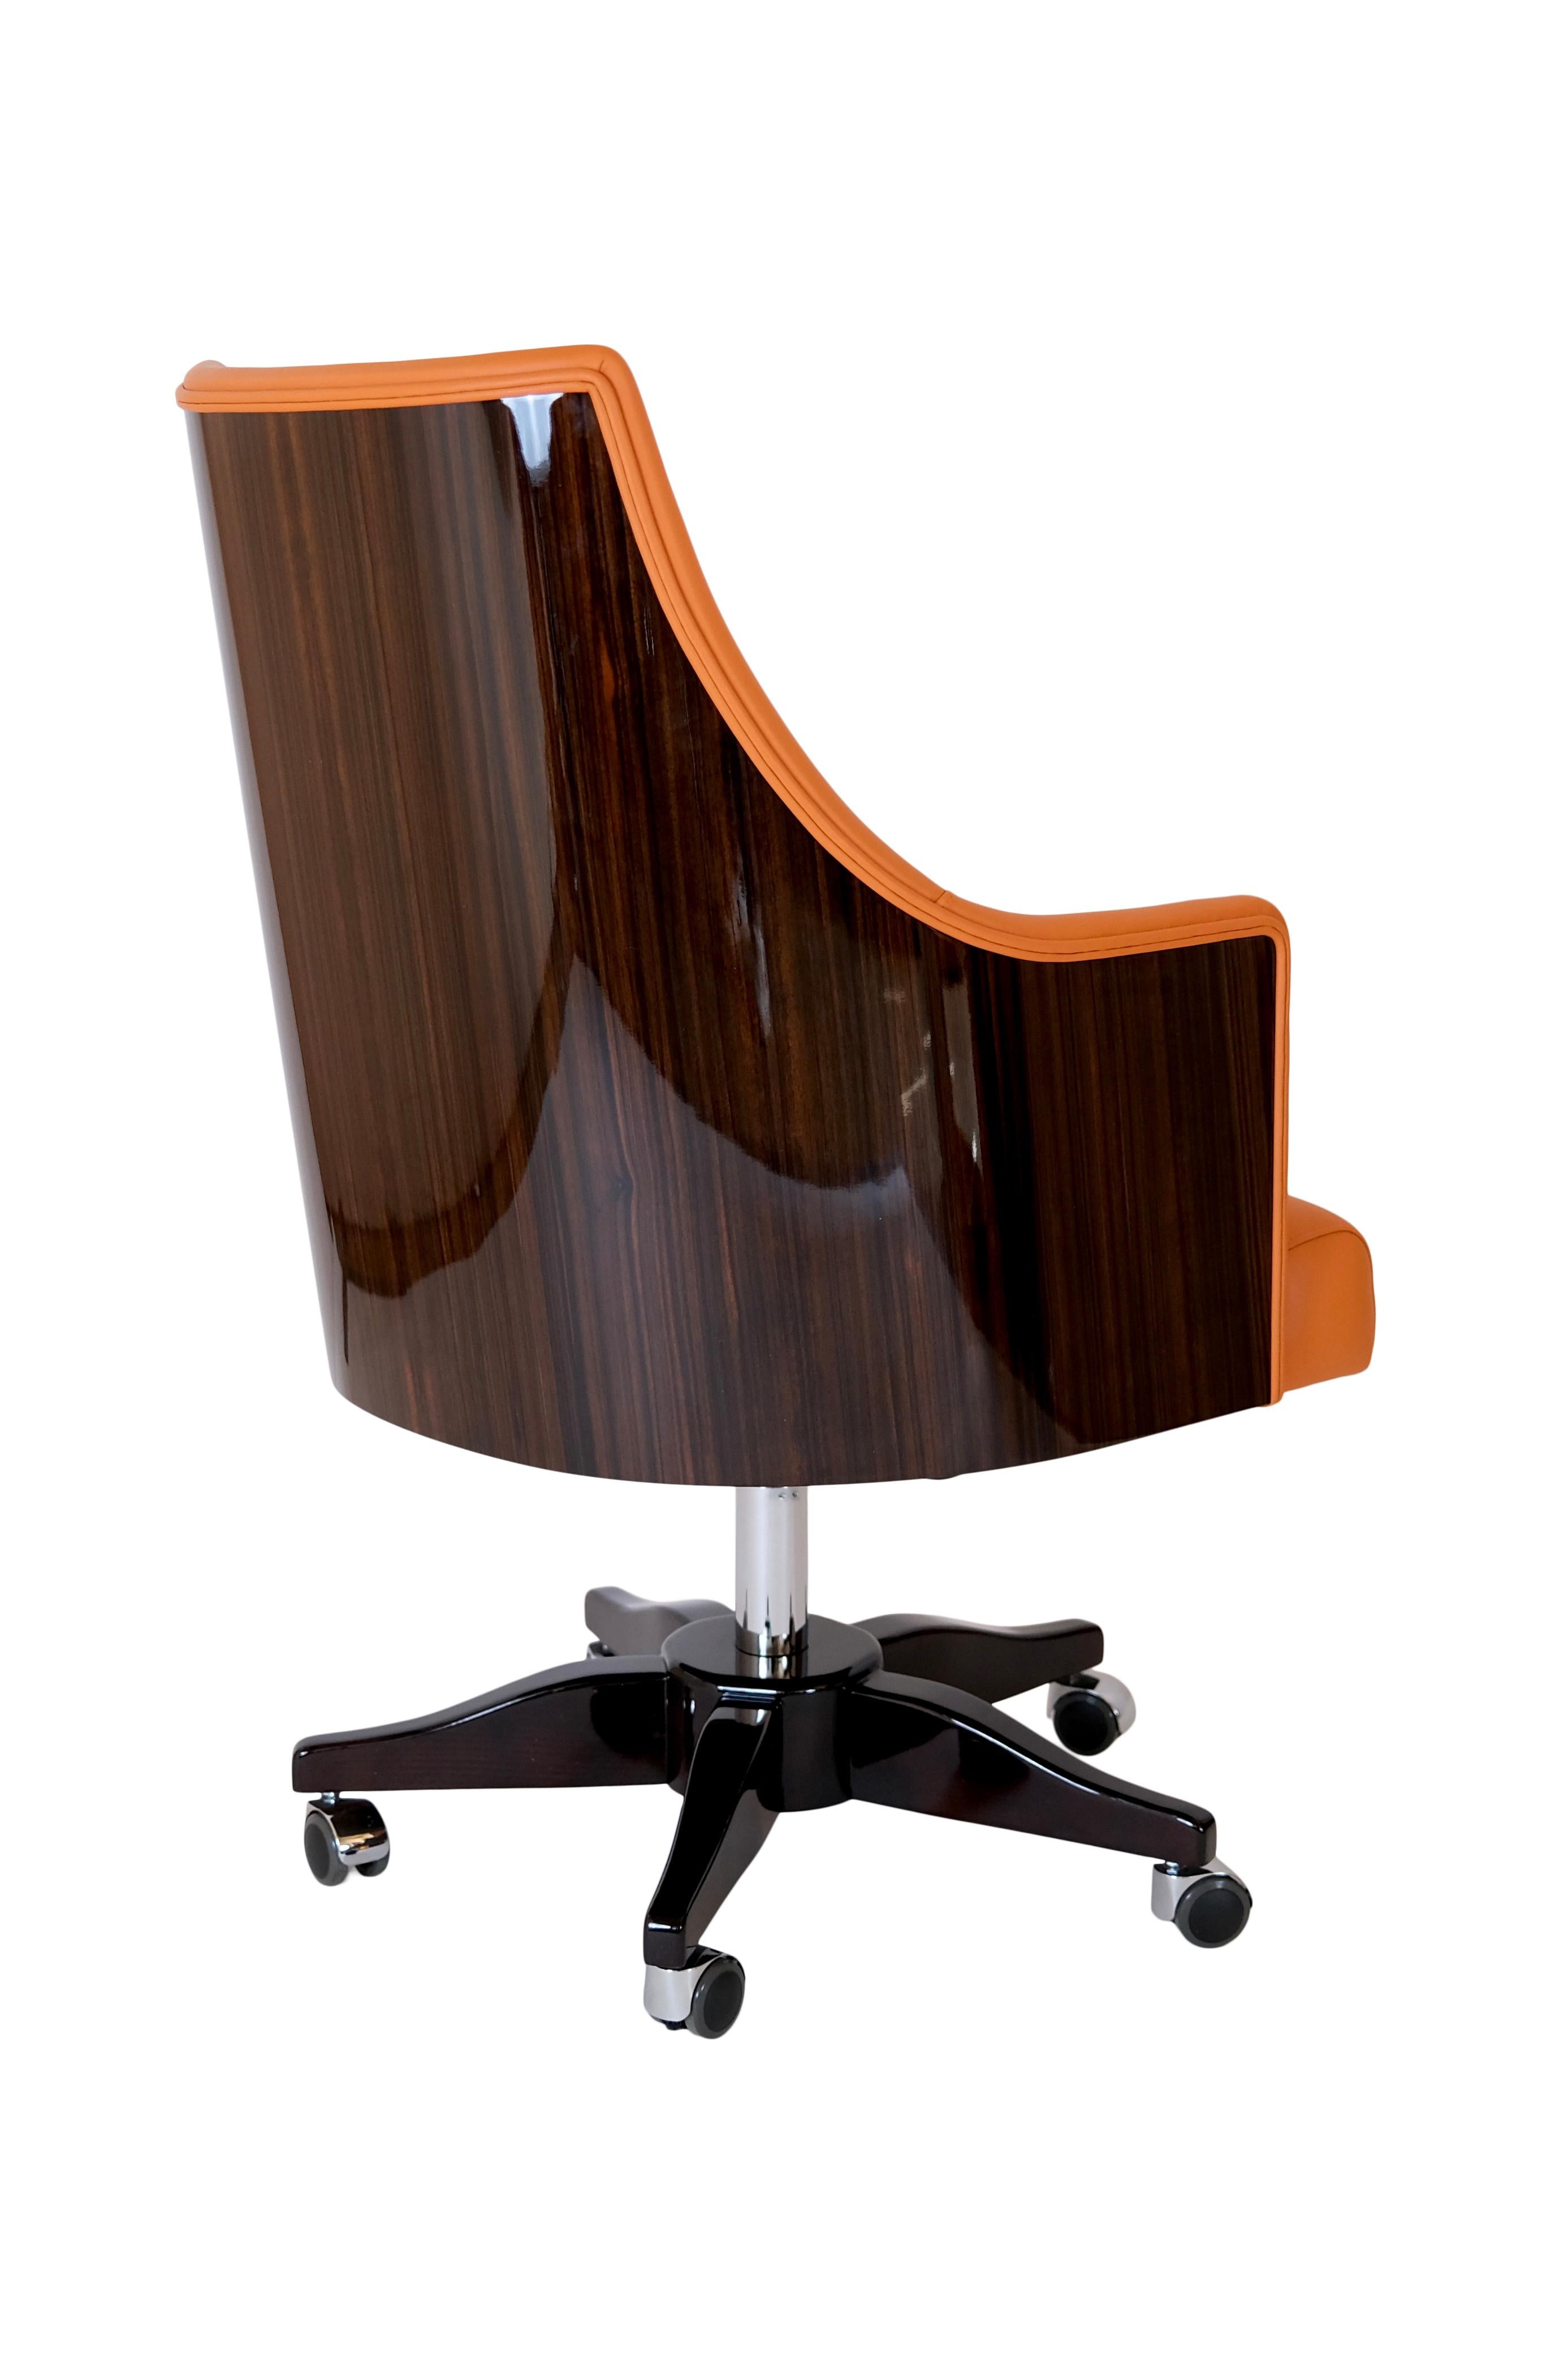 German Office Chair in Leather and Real Wood Veneer in the Style of French Art Deco For Sale